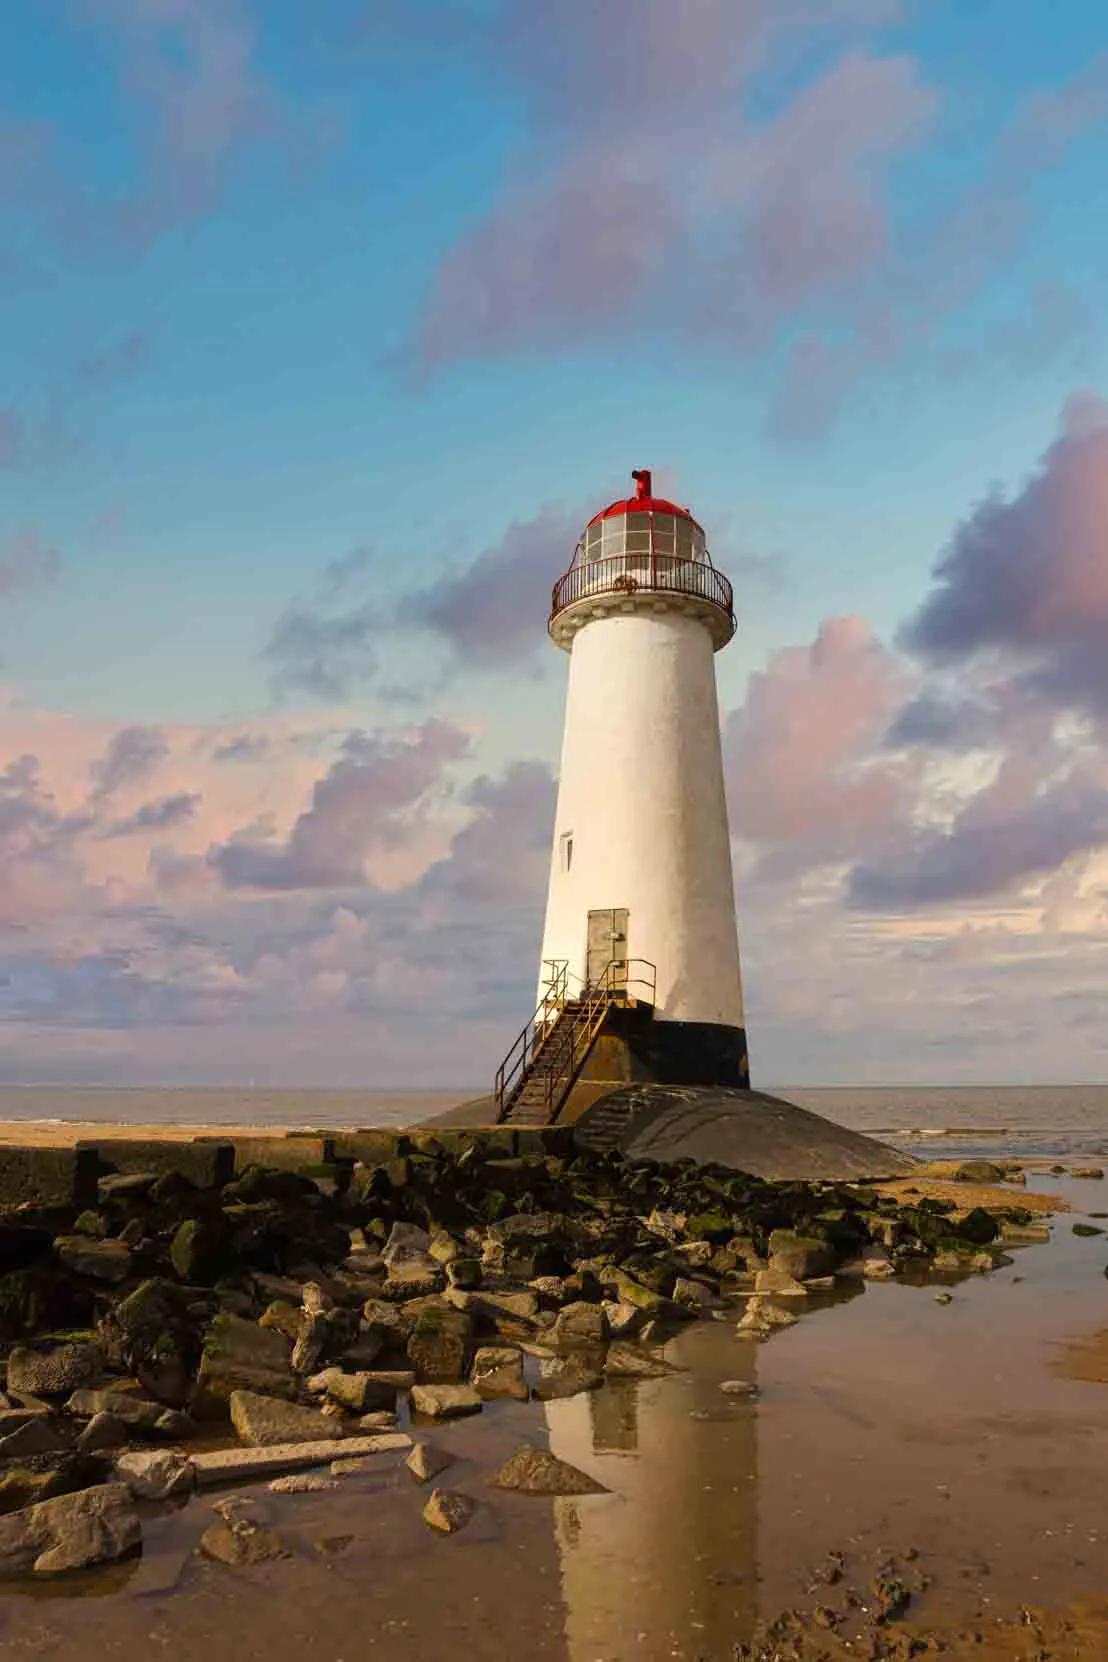 Point of Ayr Lighthouse stood tall in surrounded by shallow waters against and blue sky with pink clouds.